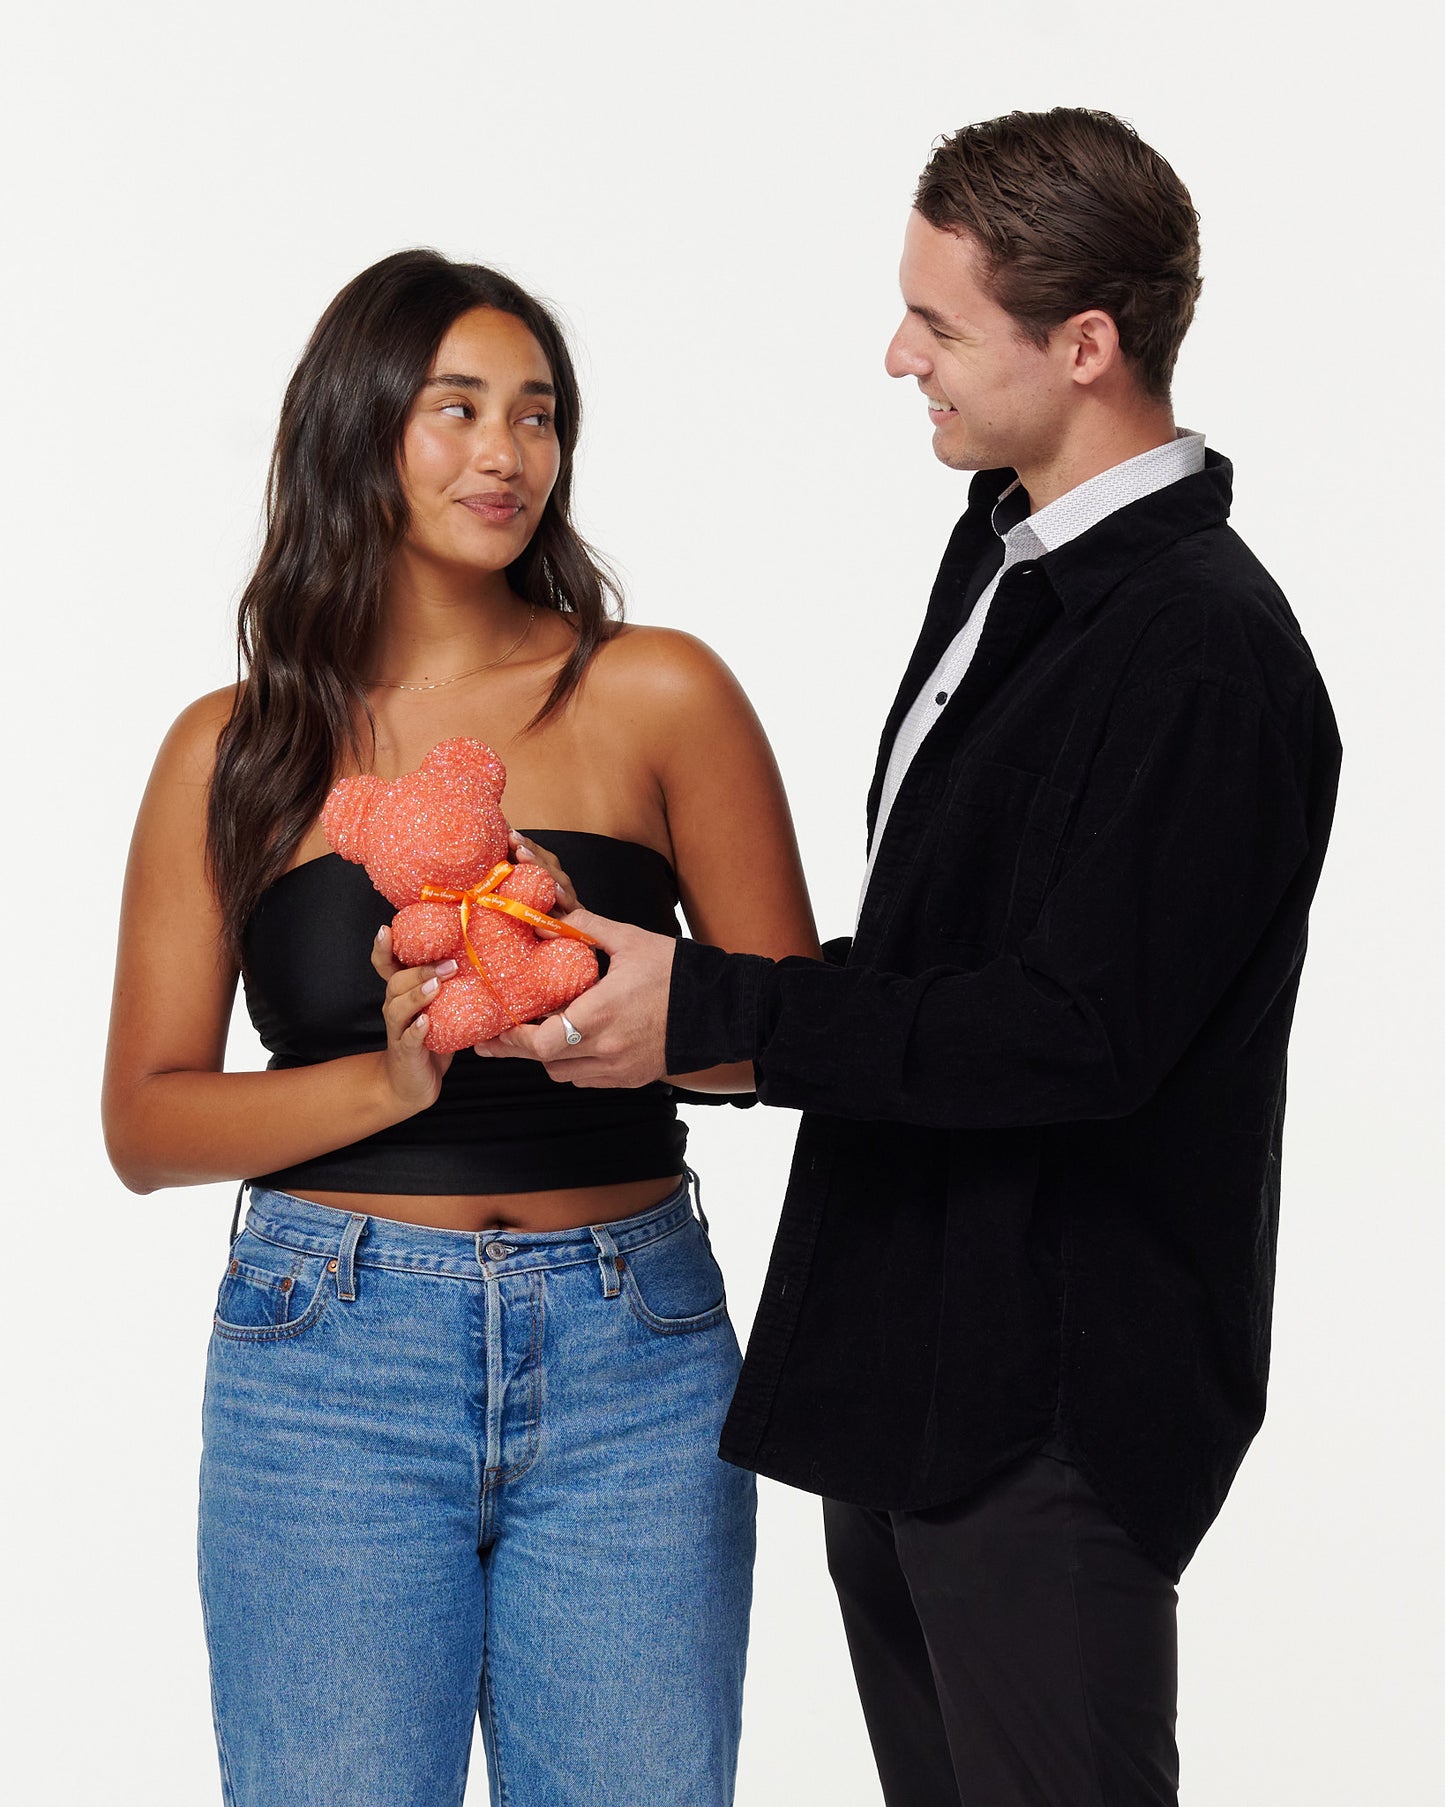 A male model giving a female model the crystal bear product as a gift